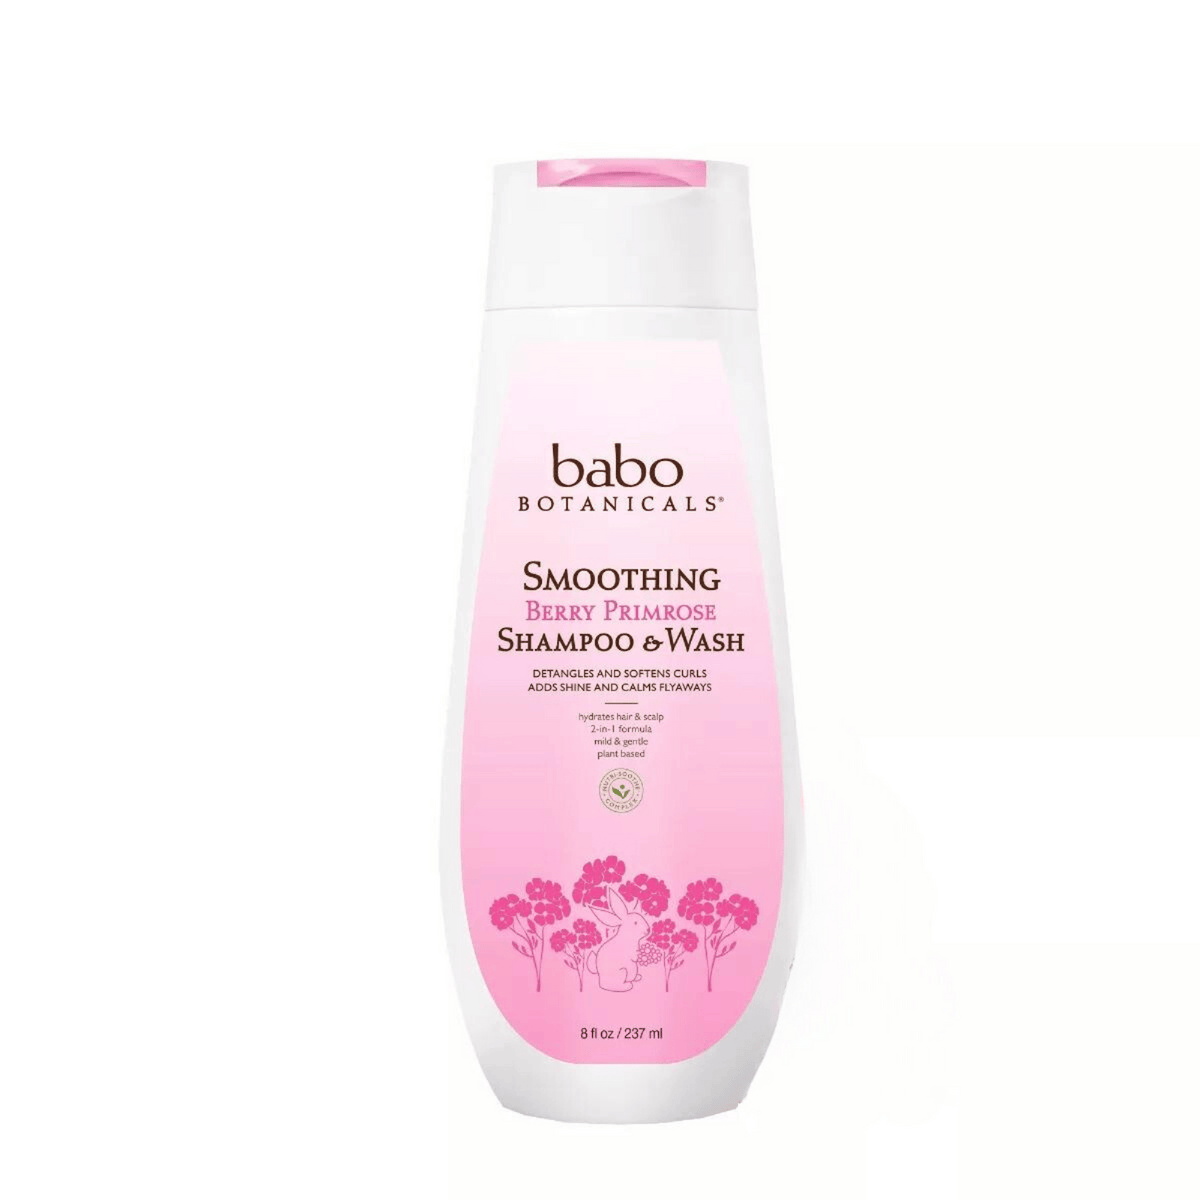 Primary Image of Smoothing Berry Primrose Shampoo and Wash